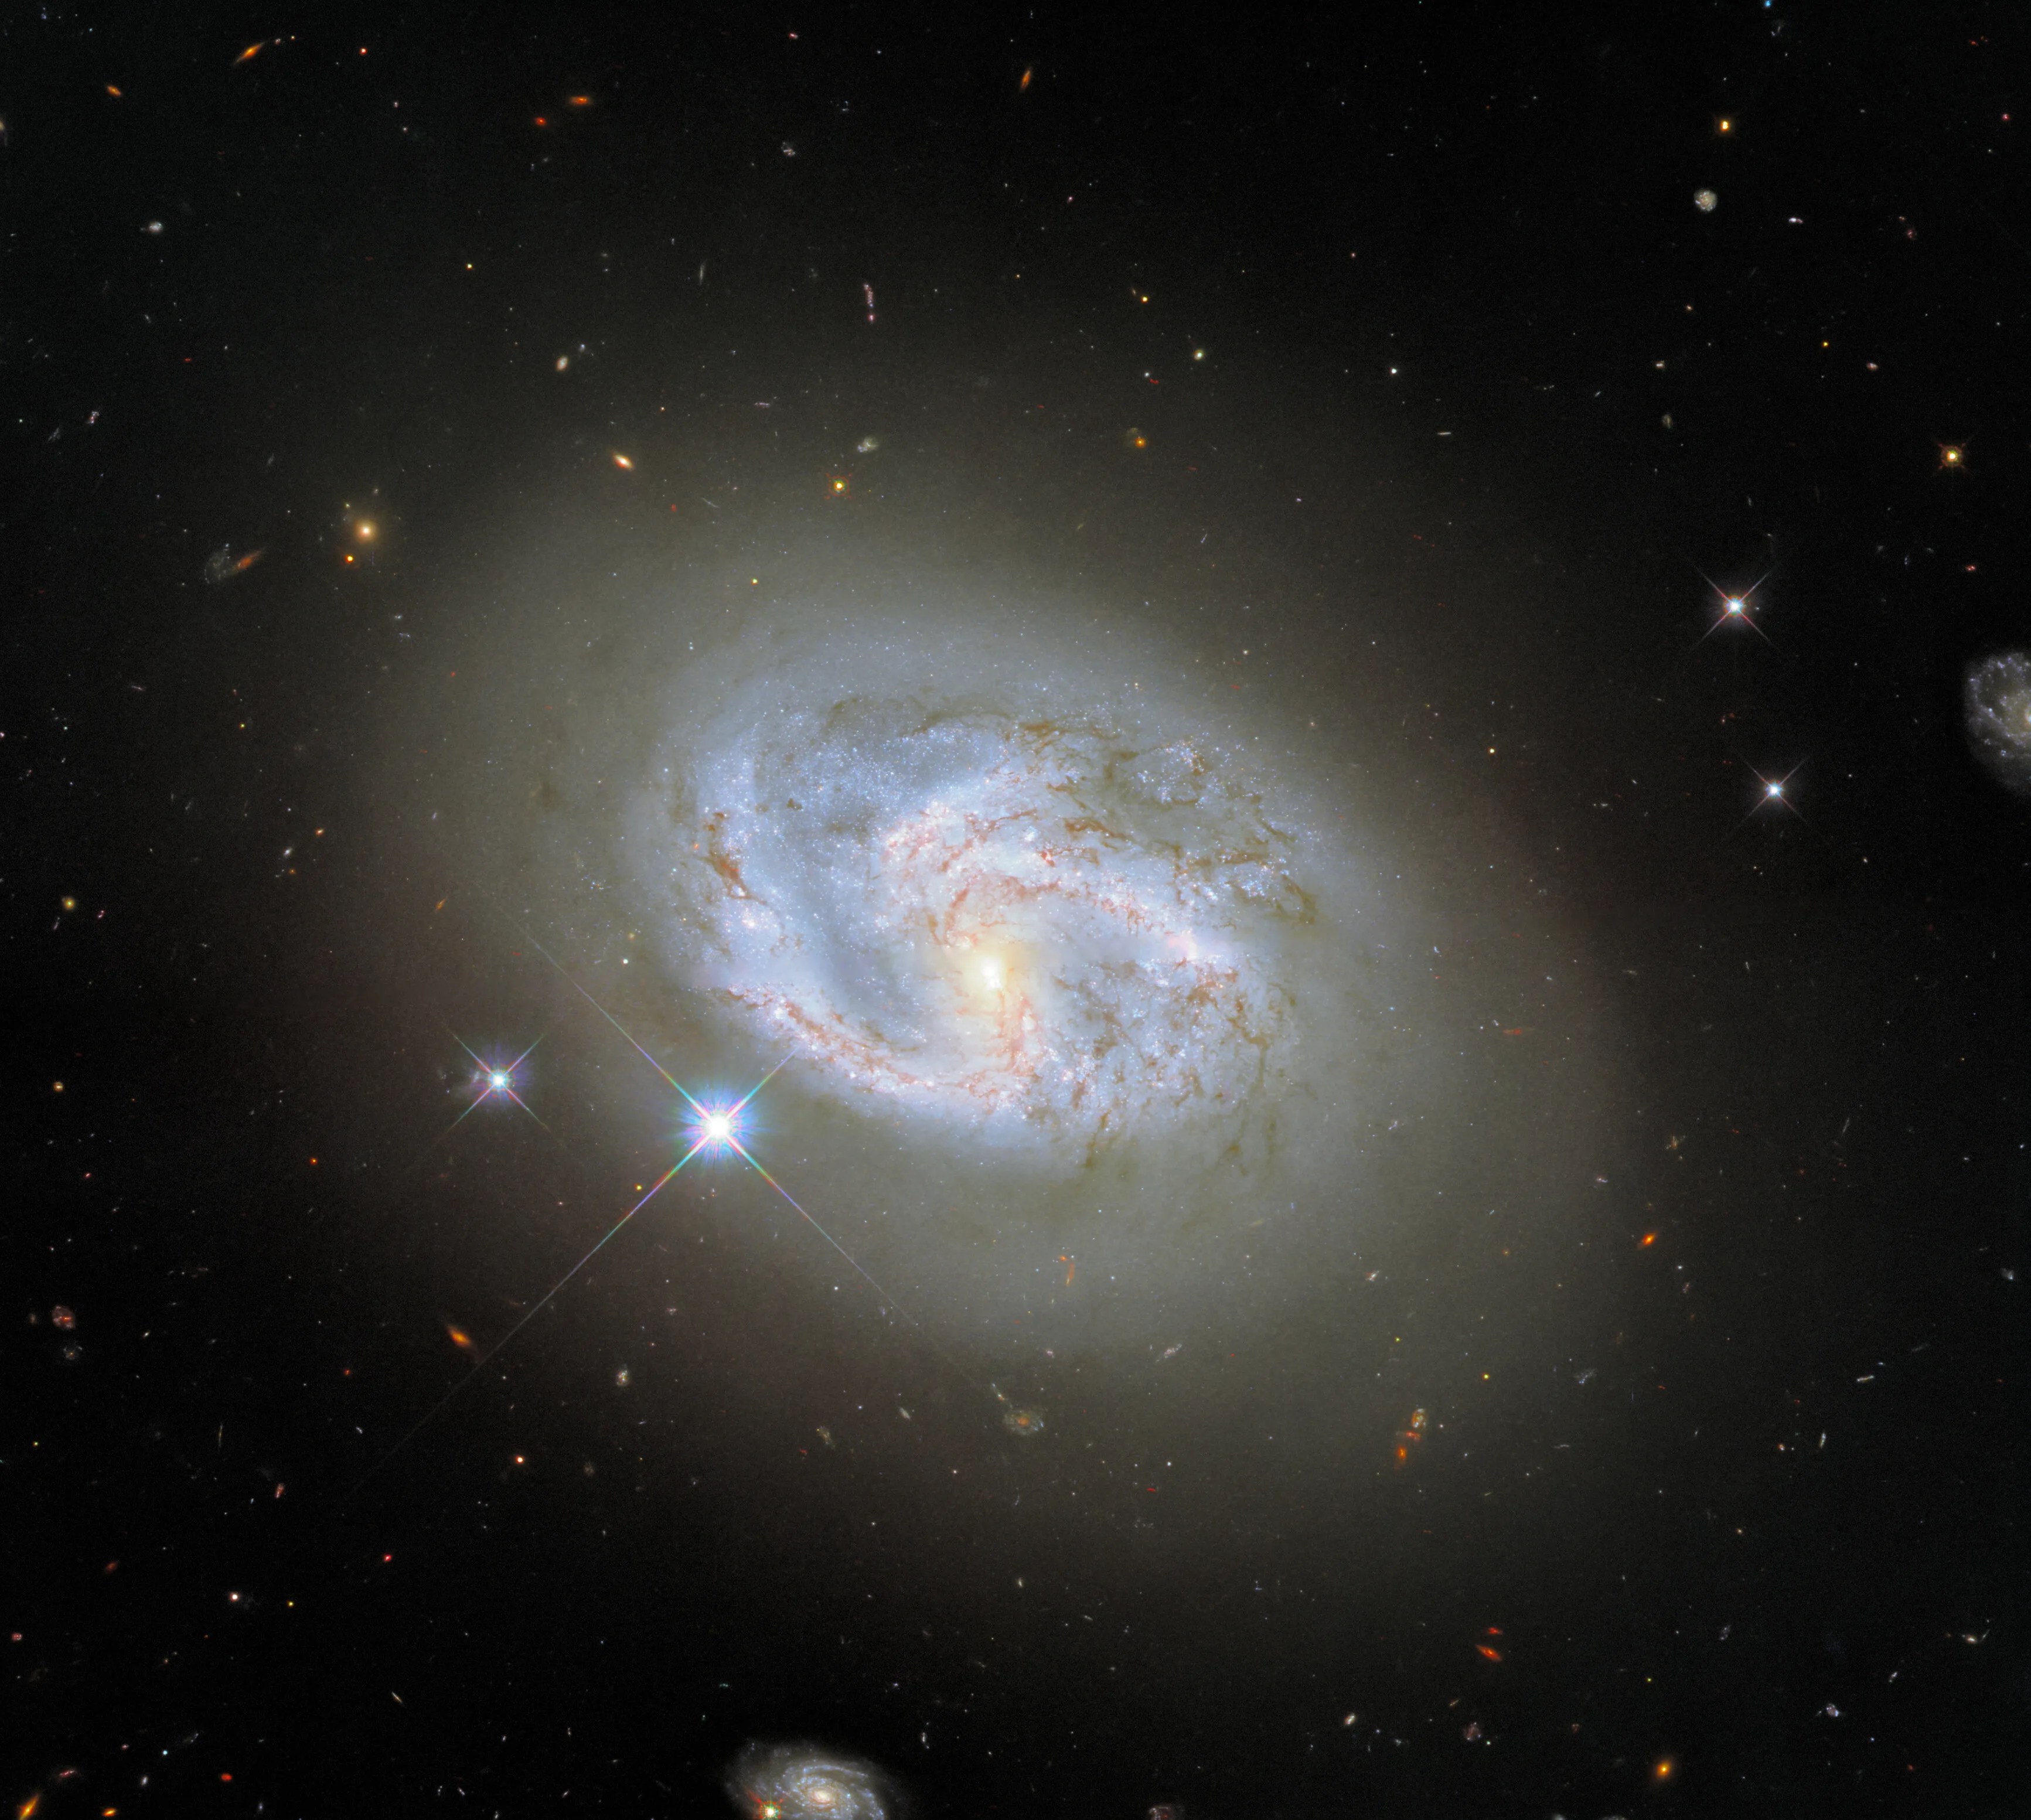 This image, taken with hubble’s wide field camera 3, features the spiral galaxy ngc 4680. two other galaxies, at the far right and bottom center of the image, flank ngc 4680.